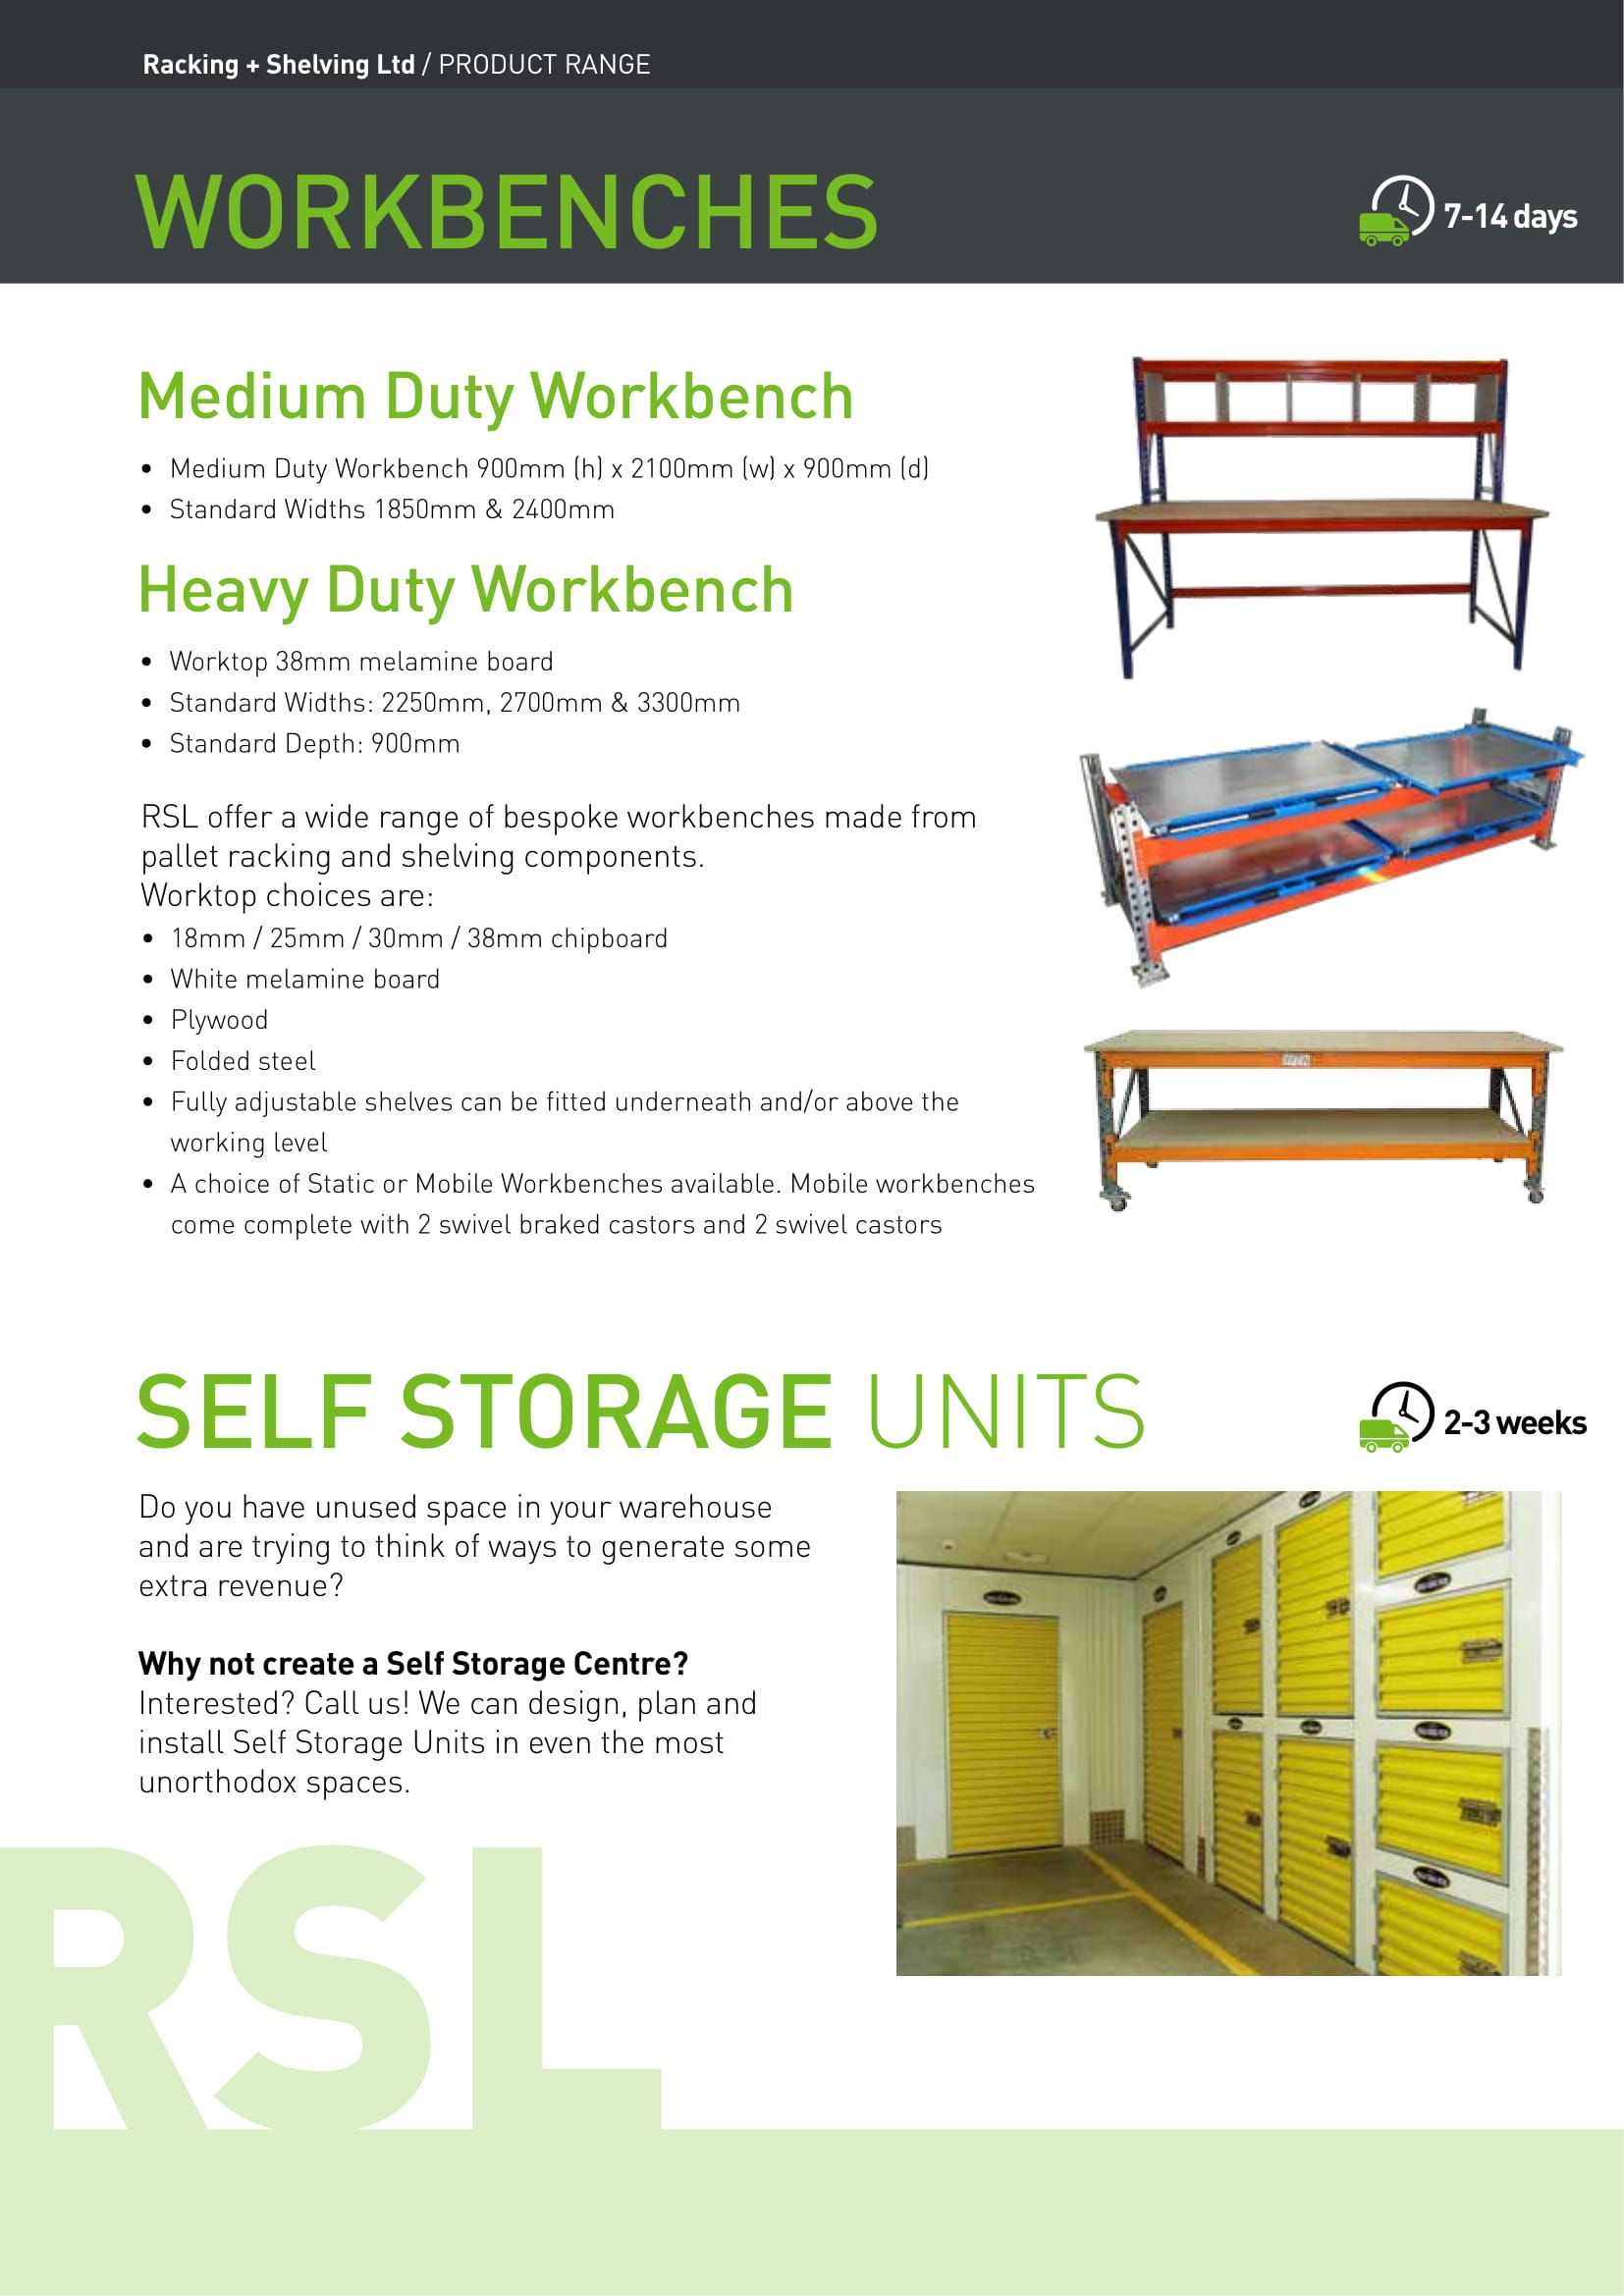 Workbench brochure page featuring medium & heavy duty benches